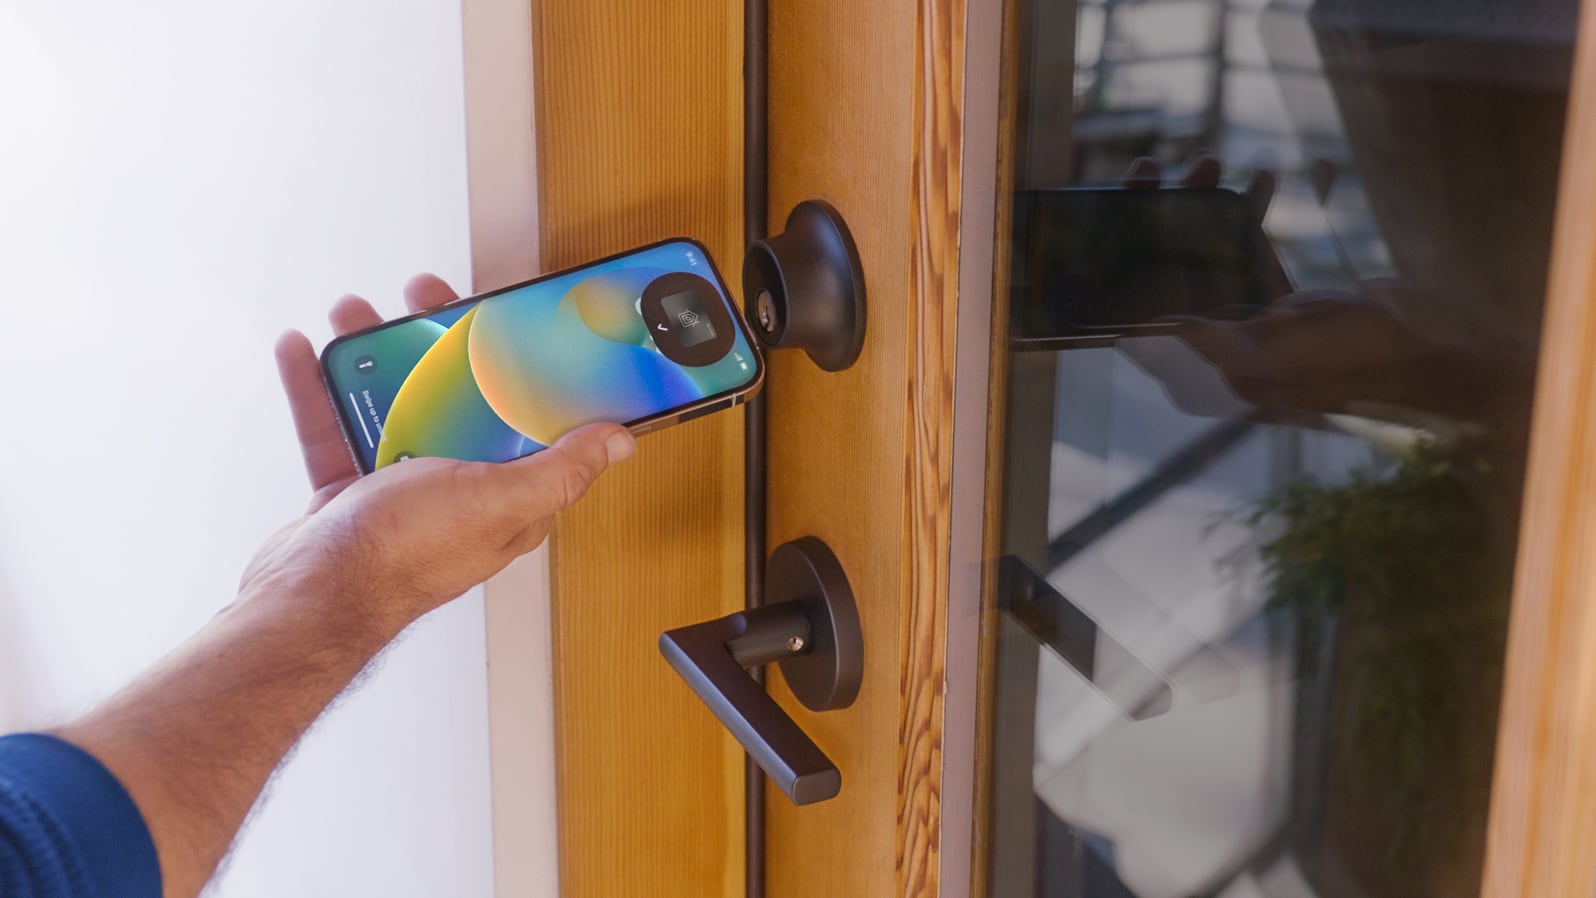 Review: The Level Lock+ Makes Unlocking Your Home Easy, But It Isn't the Most Secure